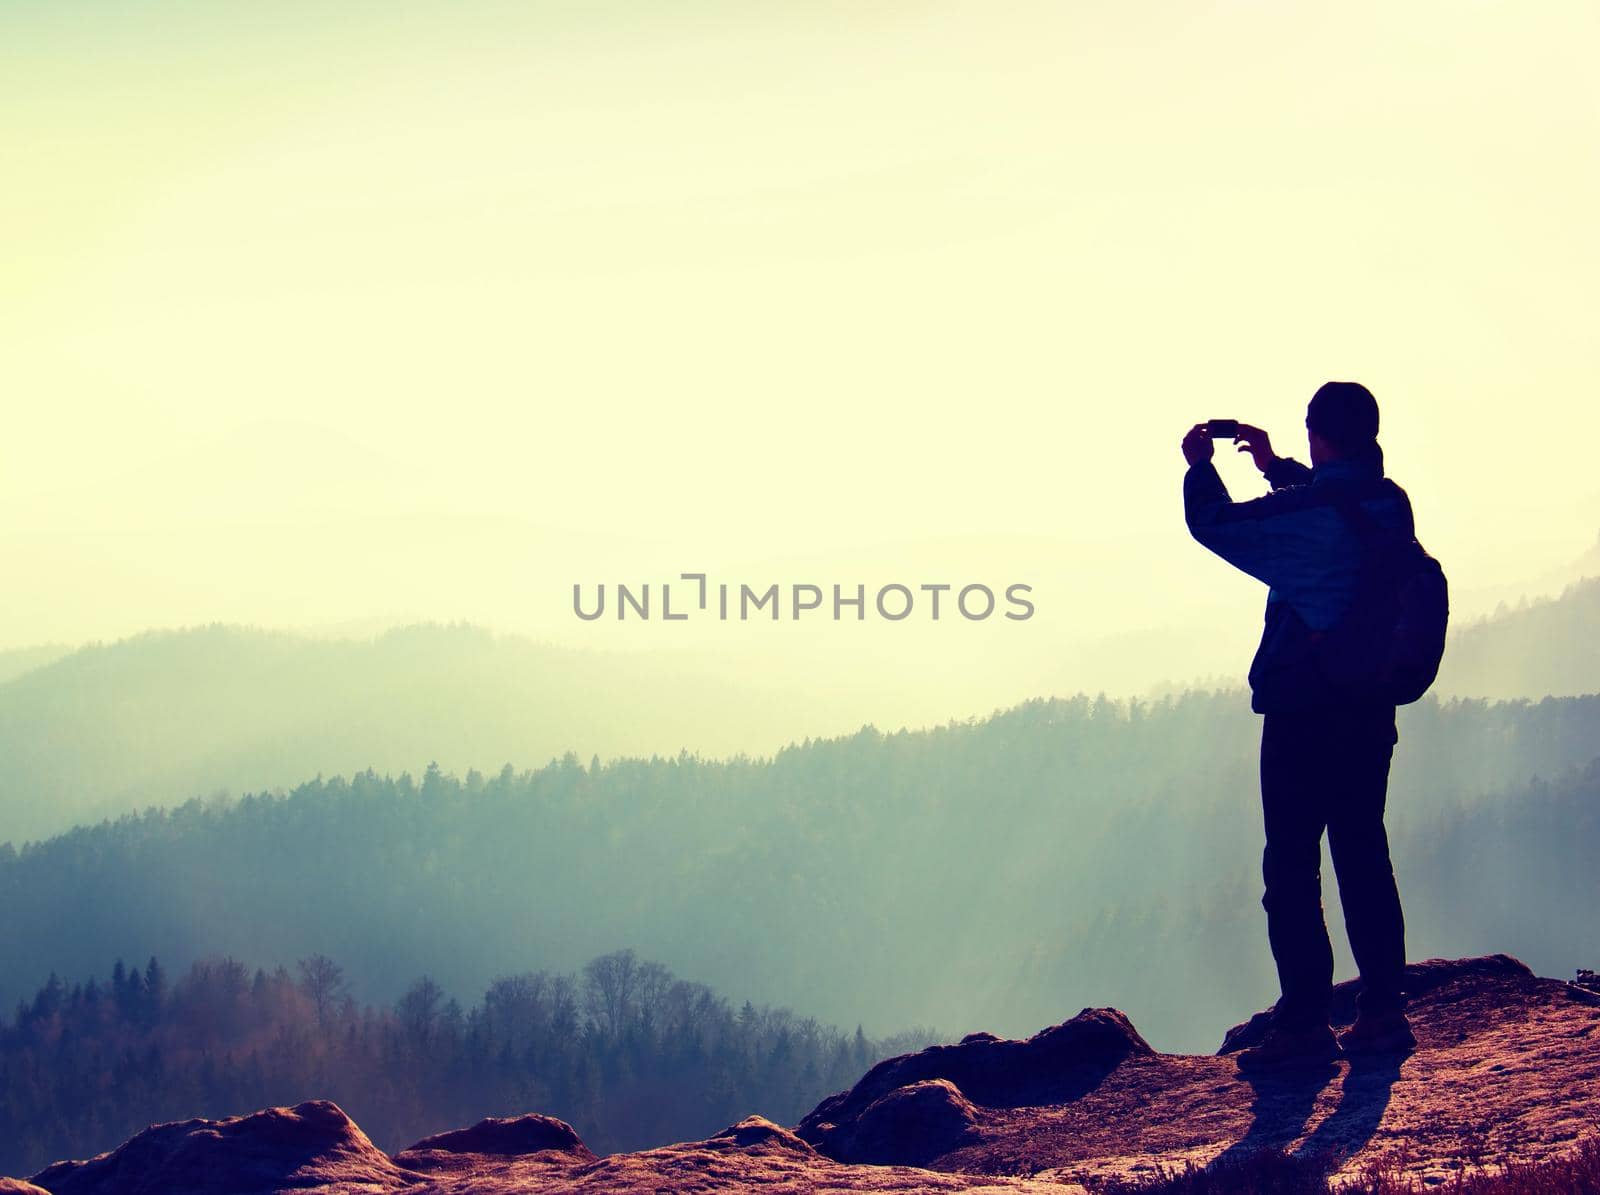 Tourist takes photos with smart phone on peak of rock. Dreamy fogy landscape, spring orange pink misty sunrise in a beautiful valley below rocky mountains. by rdonar2